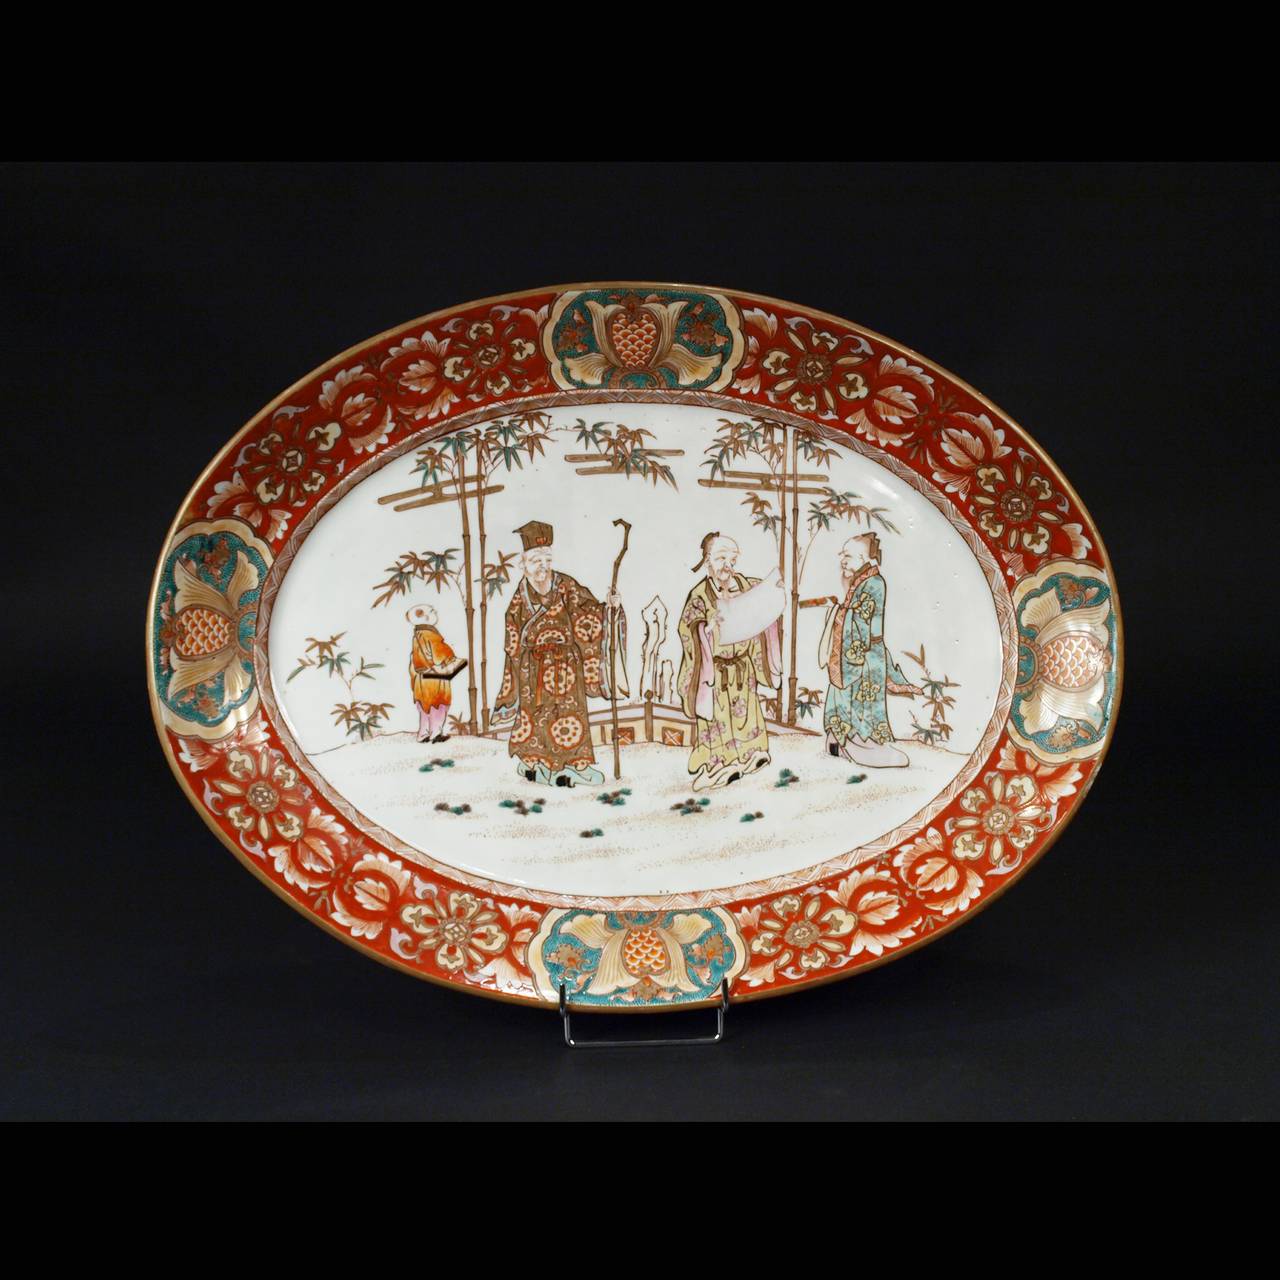 This pair of large porcelain chargers have a bright polychrome decoration of Wise men in gardens.
Different borders but with the same color.
Oval shape and size quite unusual.
Japan, Kutani, Meiji period, circa 1880-1900.